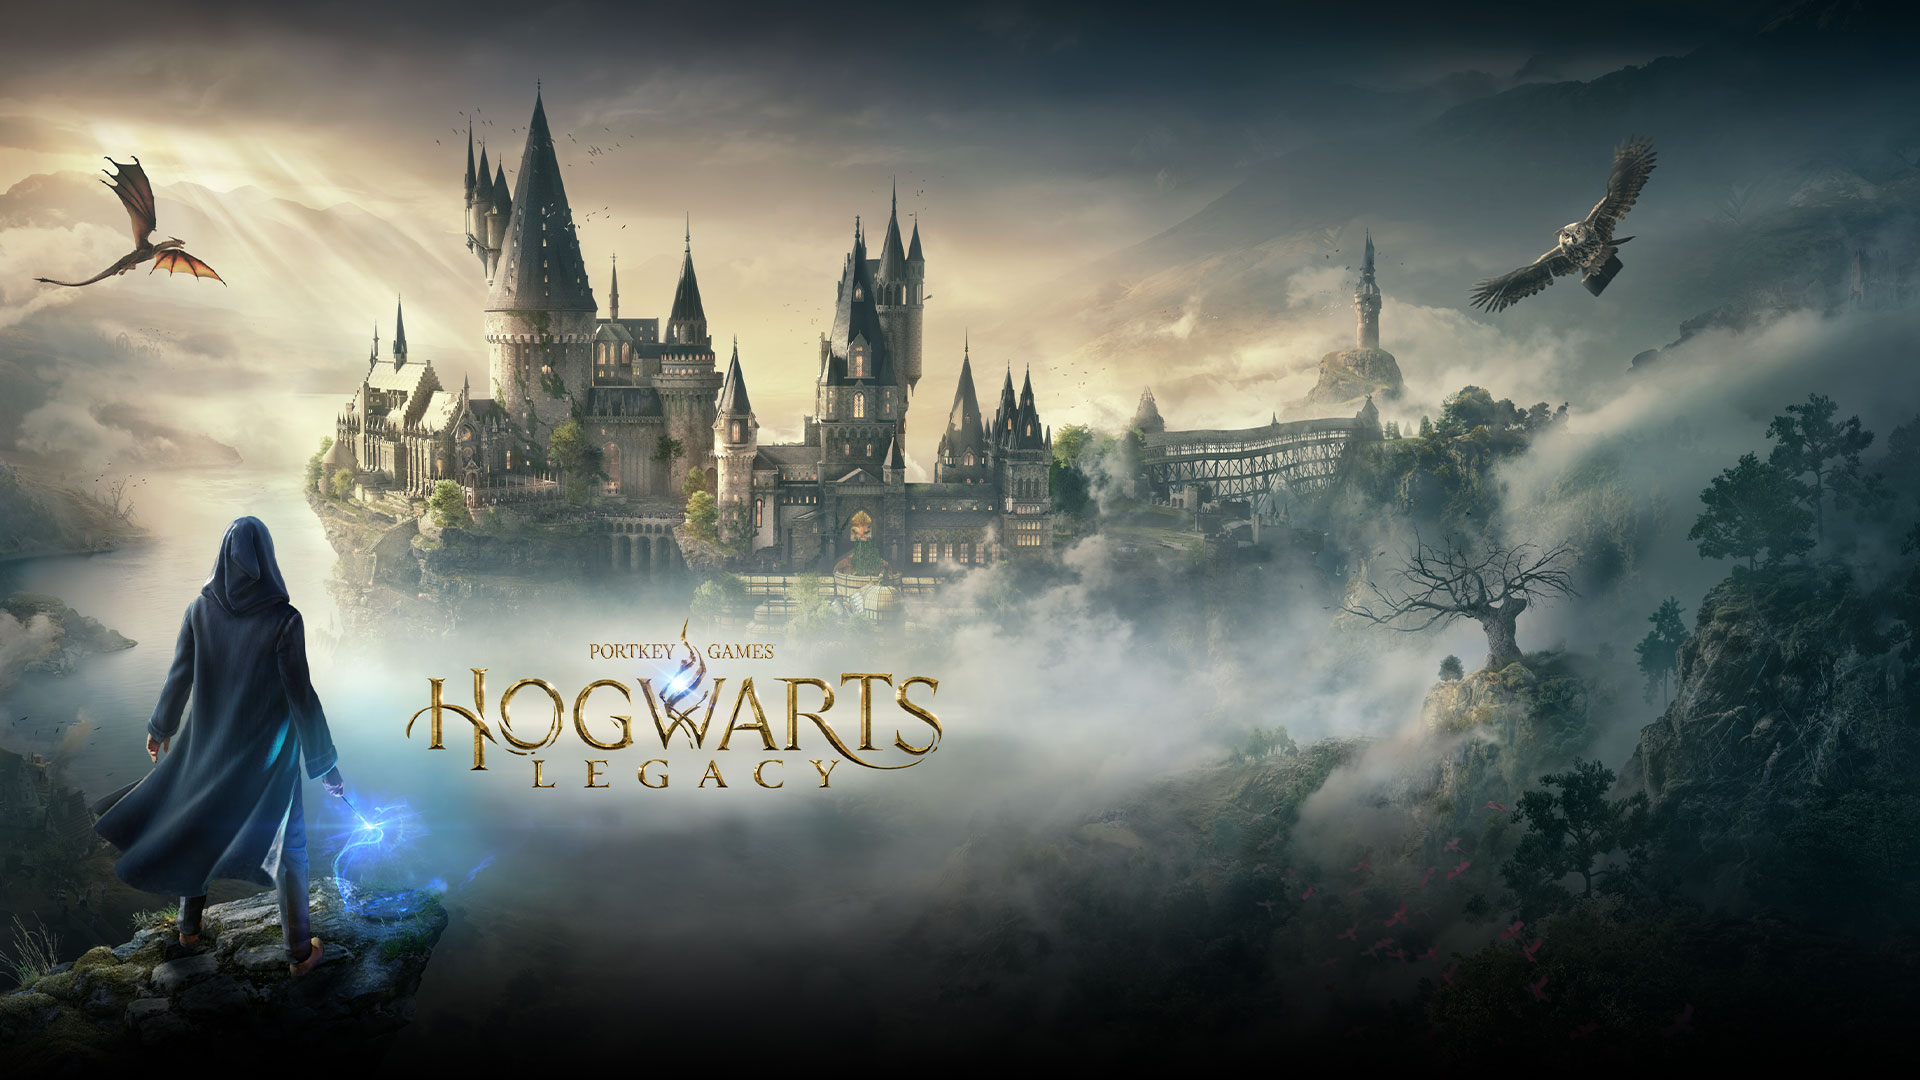 Hogwarts Legacy Nintendo Switch Trailer Gives First Official Look